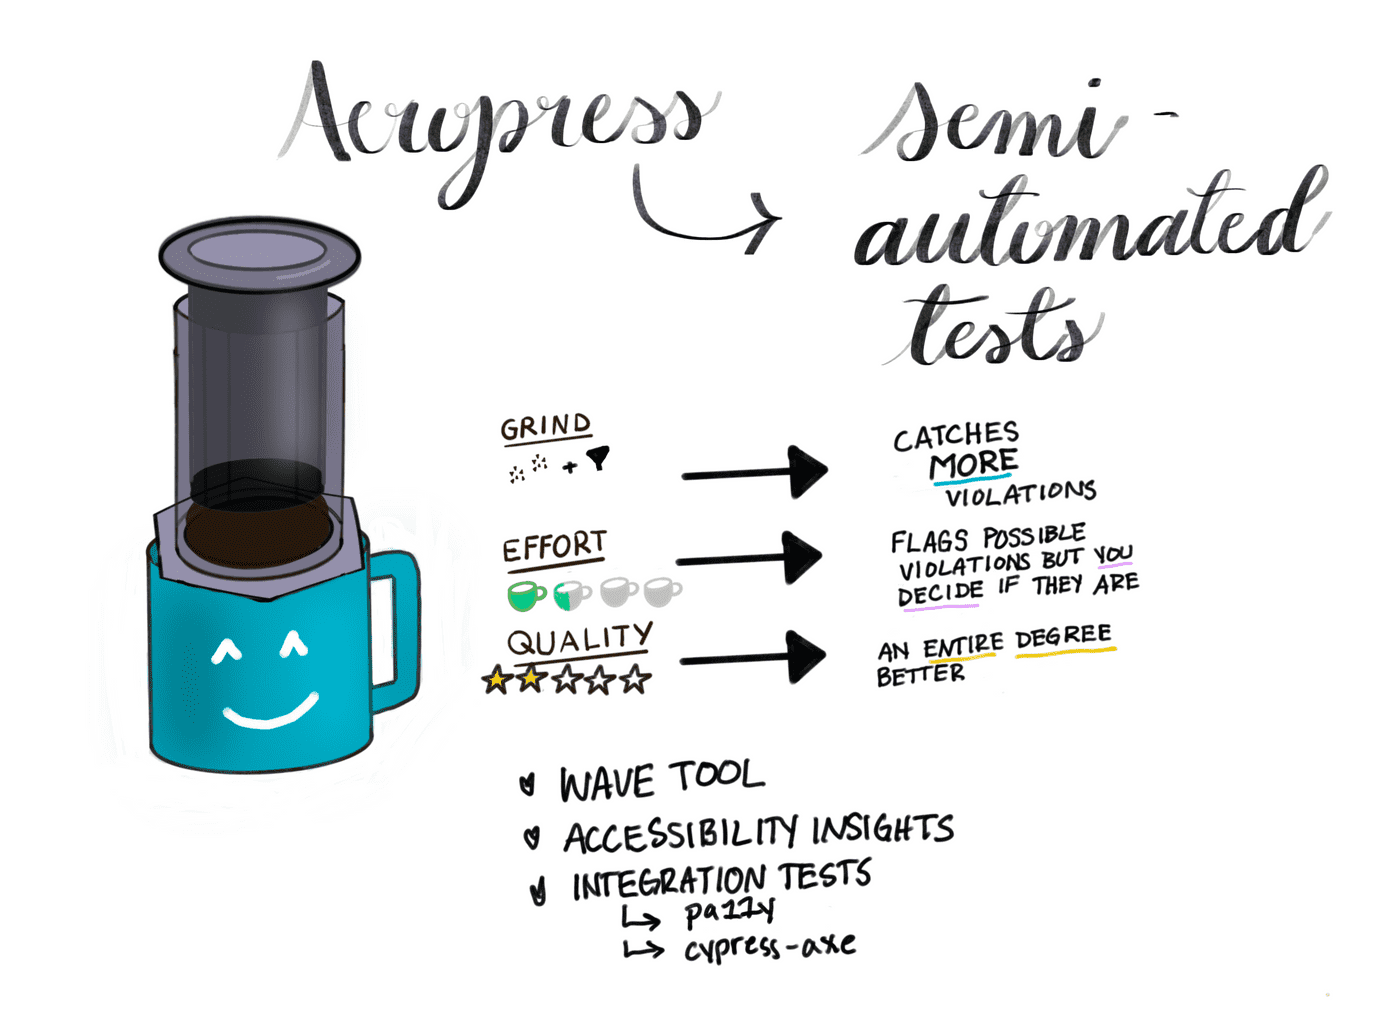 The Aeropress is Semi-automated Accessibility Testing